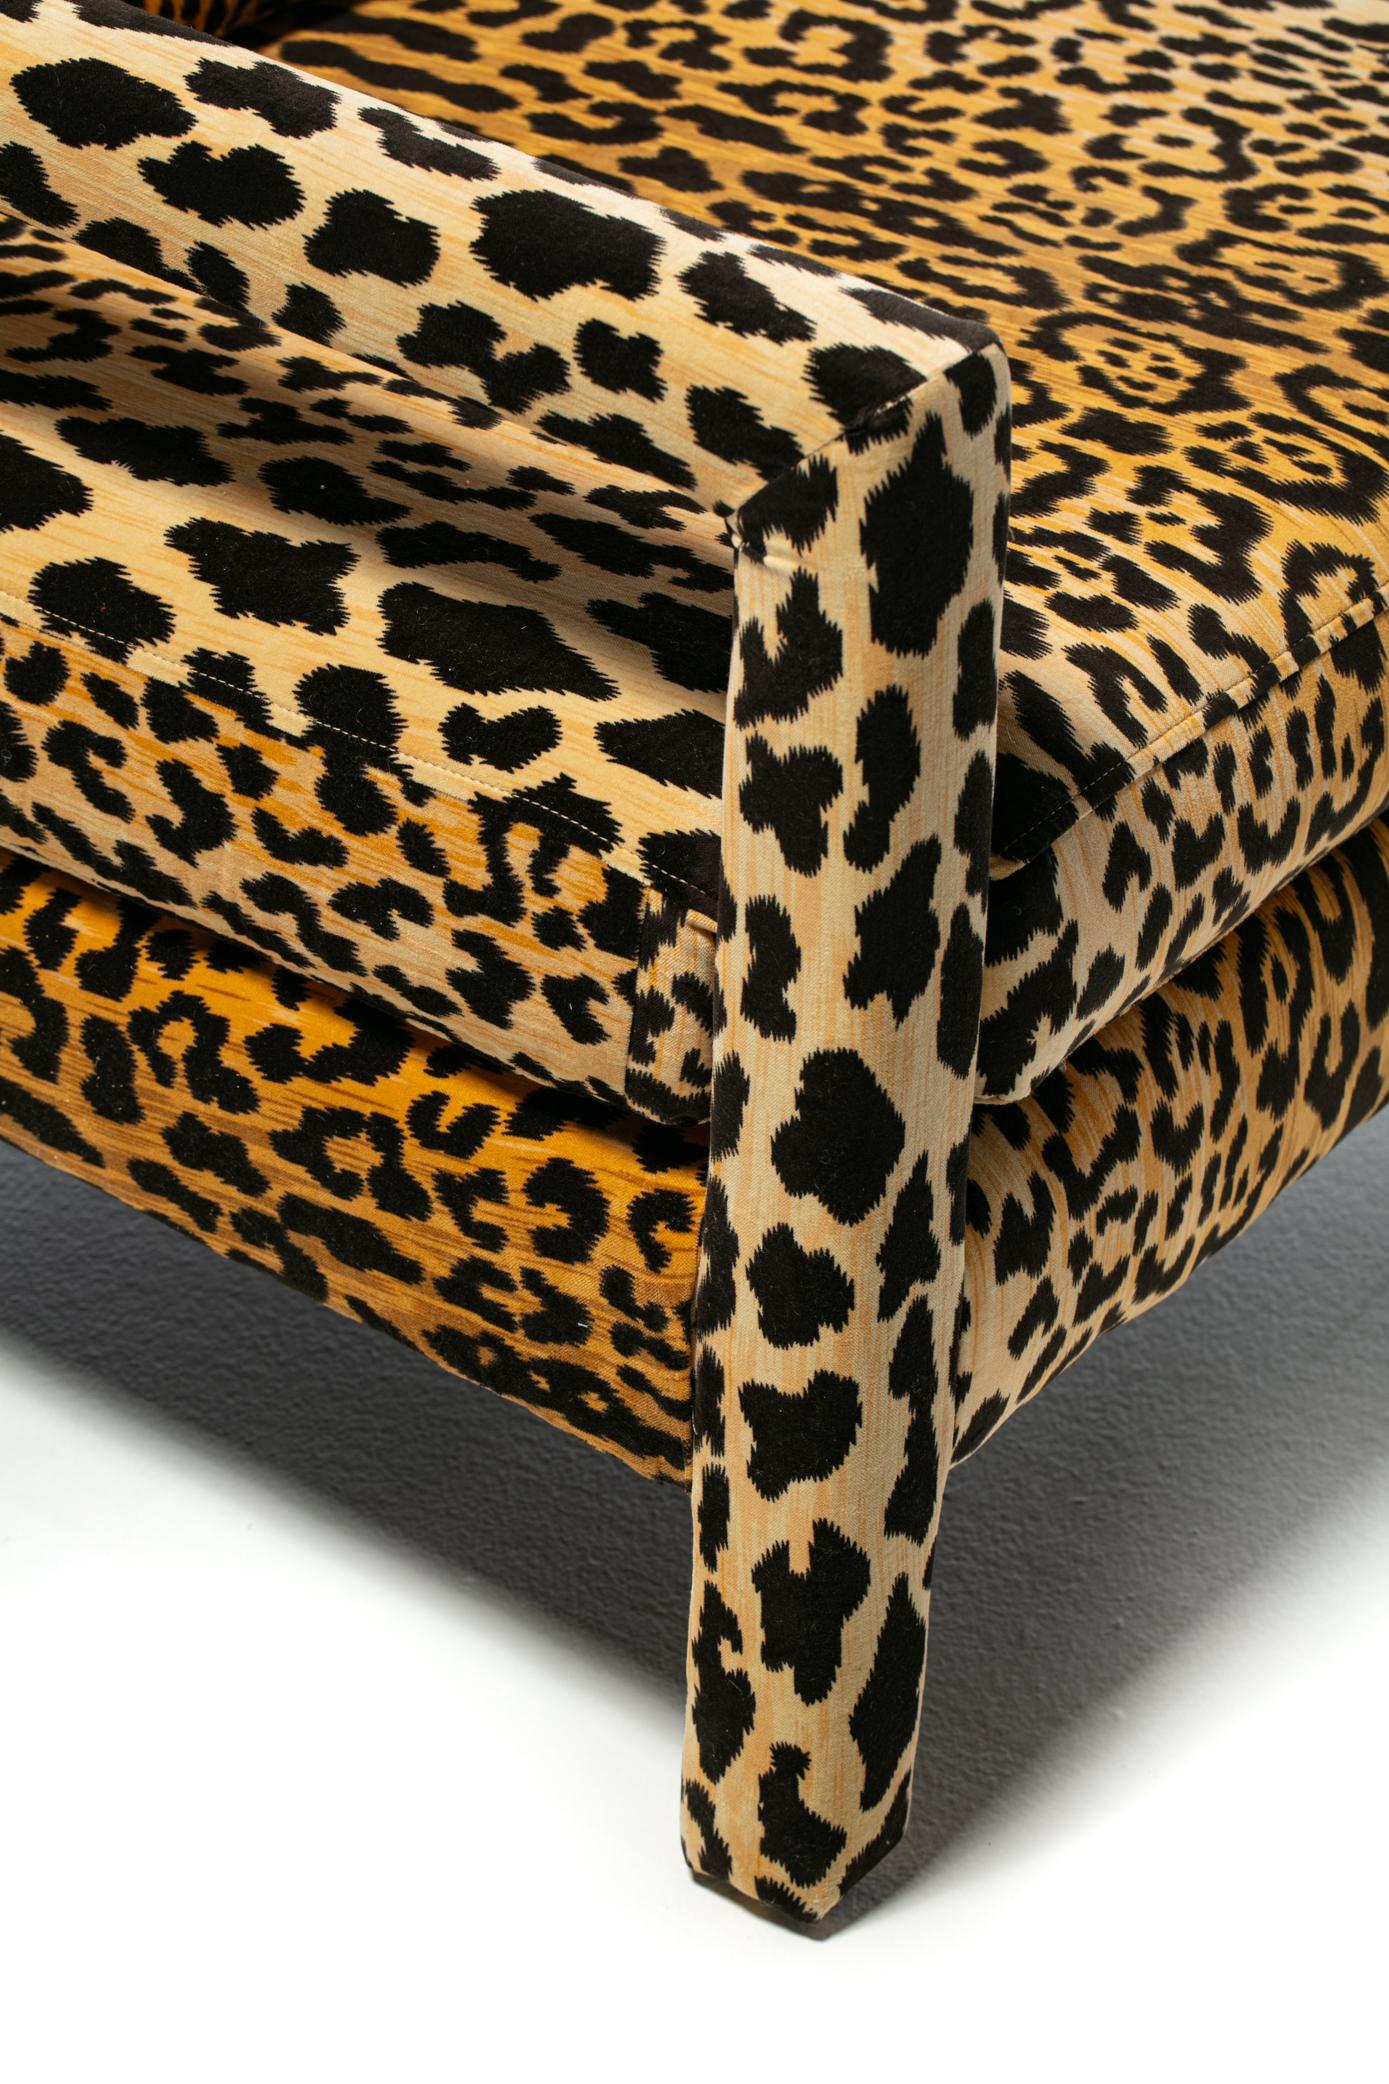 Pair of Milo Baughman Style Mid Century Parsons Chairs in Leopard Velvet c. 1970 For Sale 10